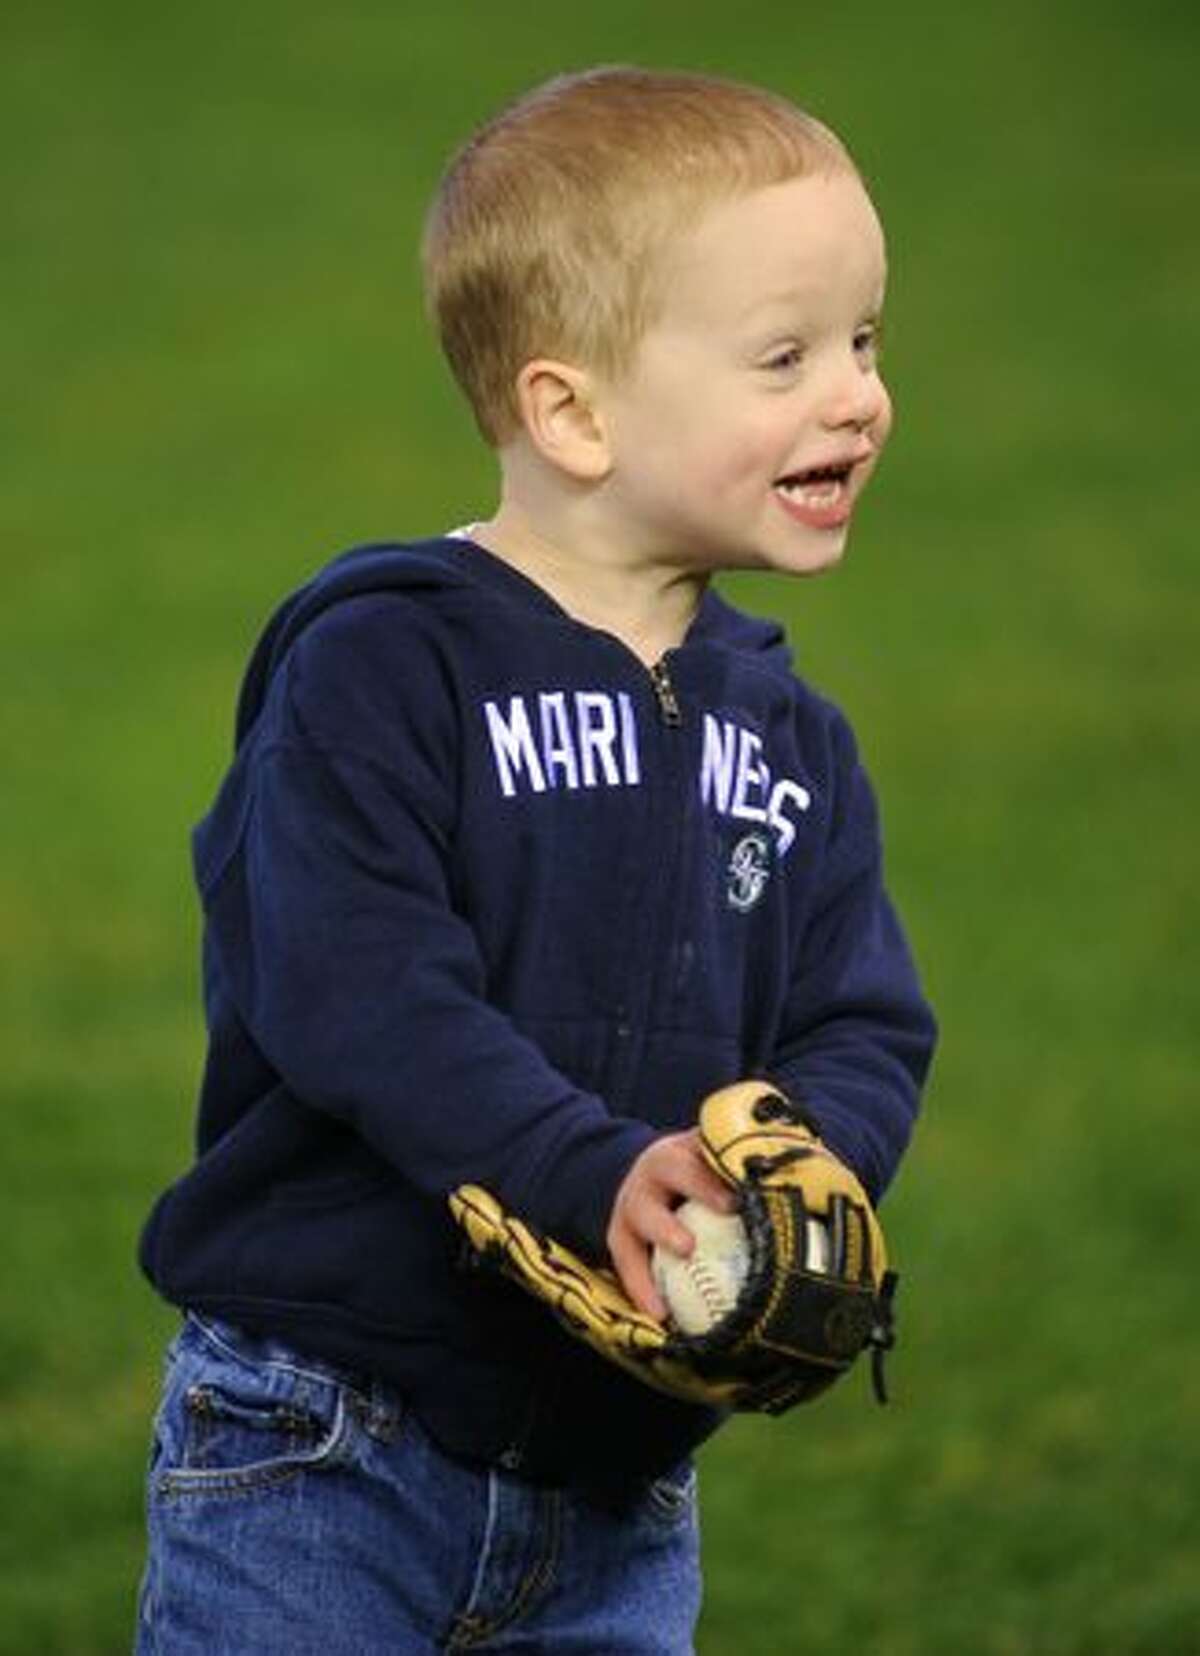 Dylan Clementz, 2, reacts to catching a ball.